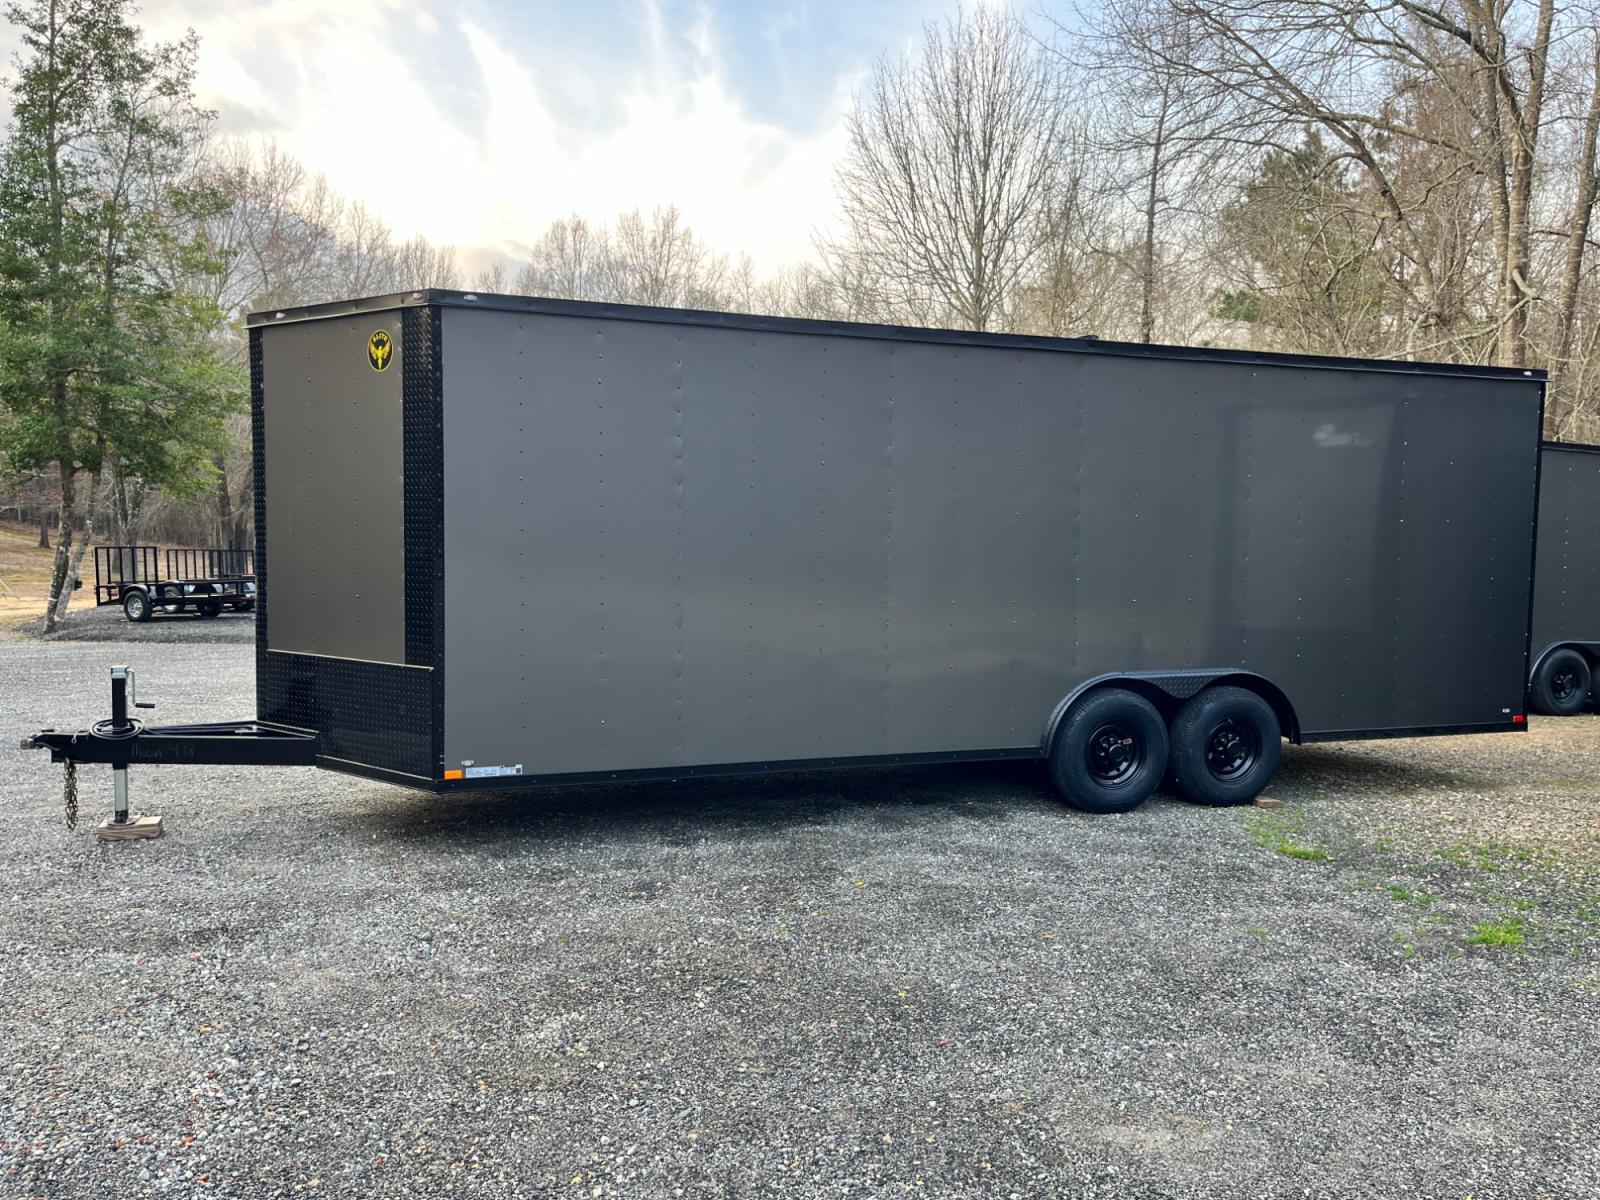 2023 .080 Charcoal Metallic w/Black Out Pkg. Elite Cargo 8.5ft X 24ft Tandem , located at 1330 Rainey Rd., Macon, 31220, (478) 960-1044, 32.845638, -83.778687 - Brand New 2023 Model Elite Cargo Trailer, Made in Tifton, GA 7ft 5" Tall Inside Height This Deluxe Enclosed Car Hauler has Awesome Features! .080 Thick Charcoal Metallic Skin! Awesome "Black Out Trim Package!" 2 Inside LED Dome Lights with Wall Switch! Much Taller Inside, 7ft 5" Tall Inside. Th - Photo #5